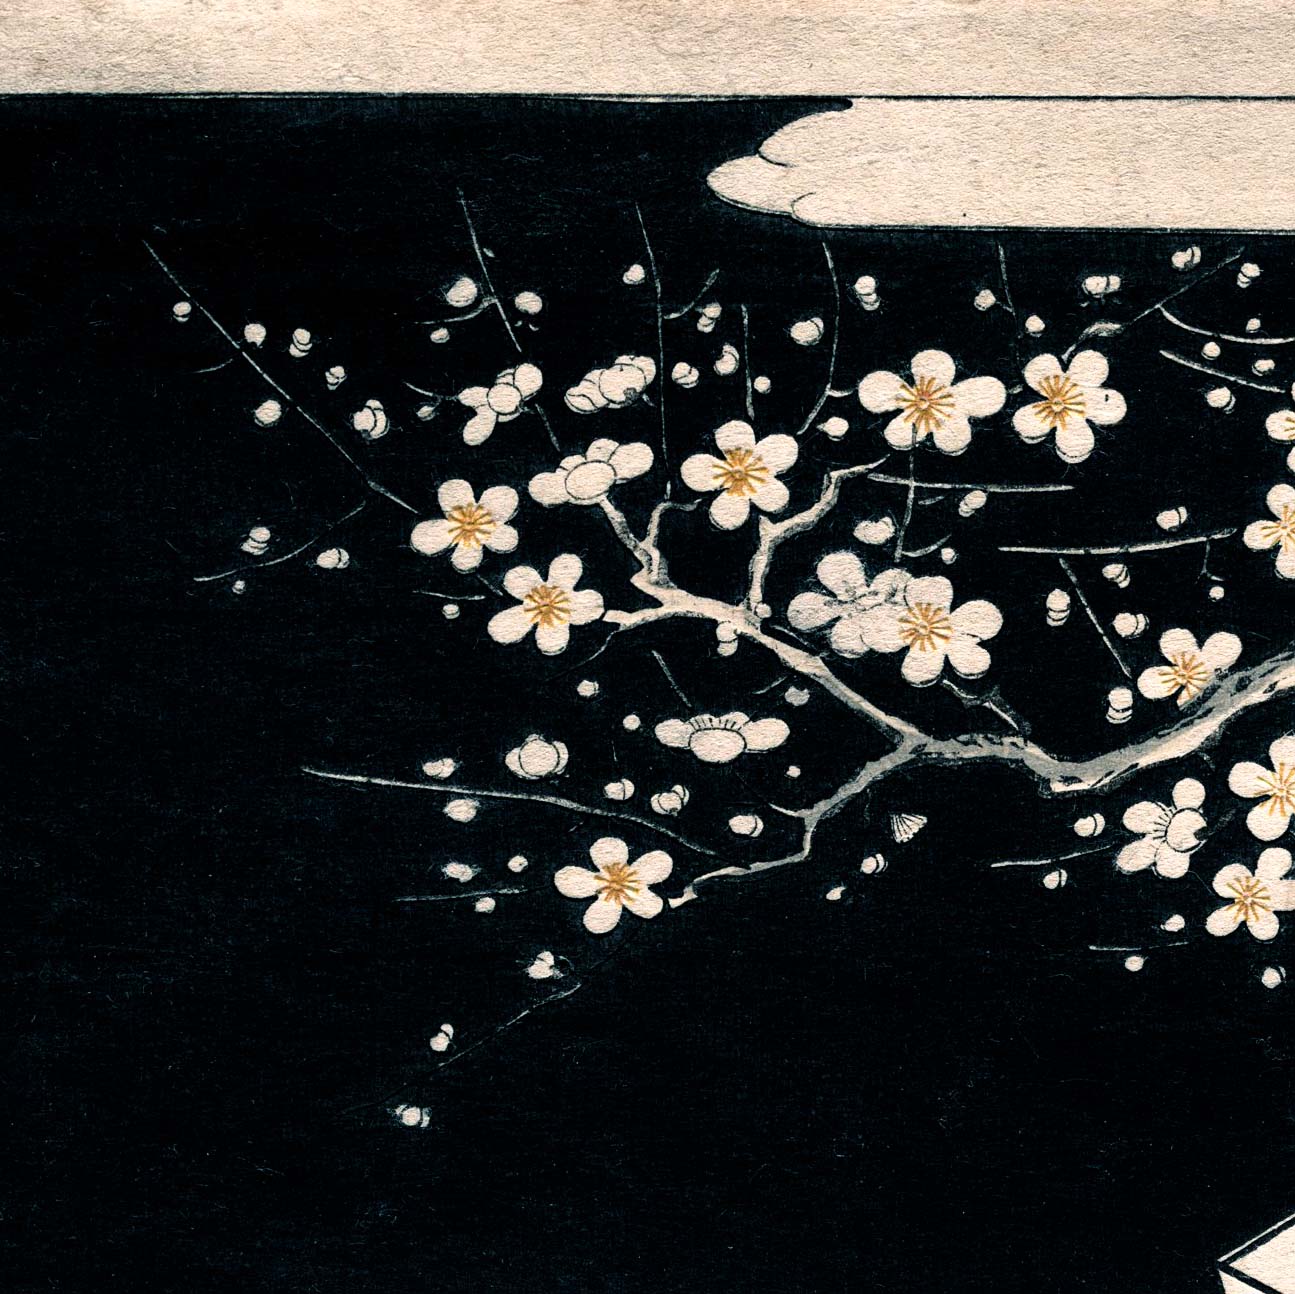 Woman Admiring Plum Blossoms at Night - Japonica Graphic